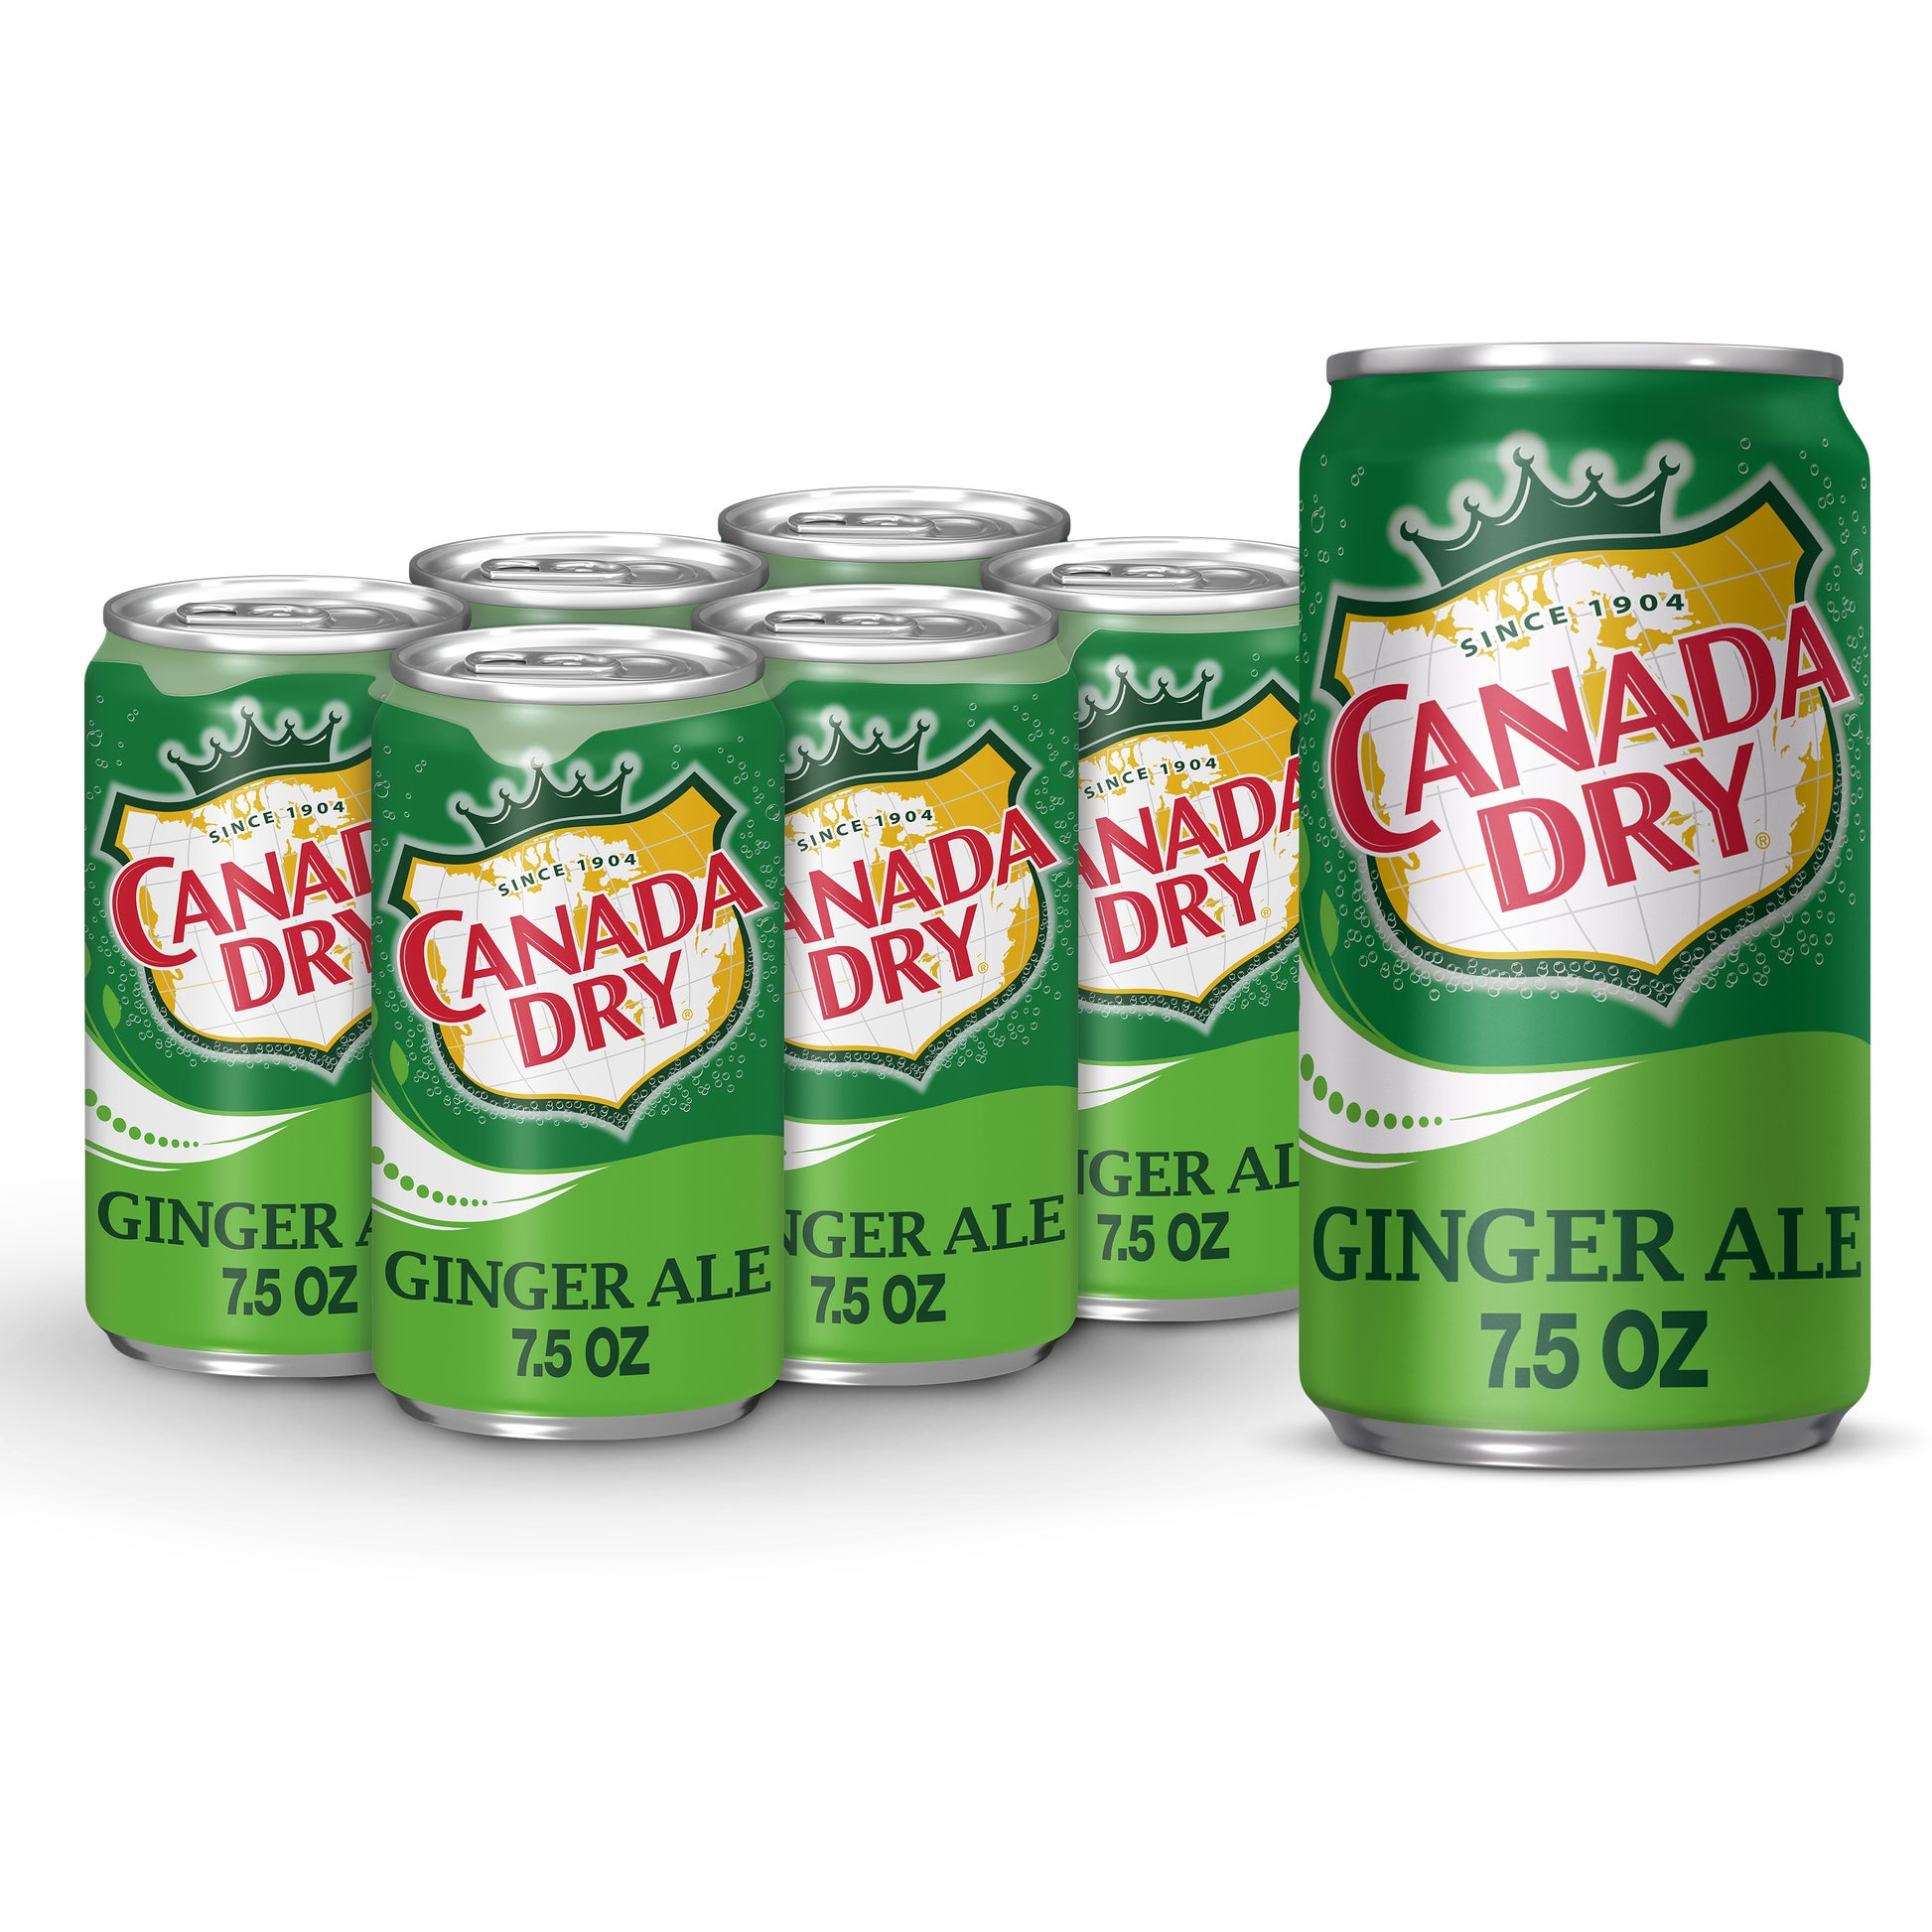 Canada Dry Ginger Ale Mini Cans 7.5oz 12 Pack or 24 Pack - drinkdrop.net